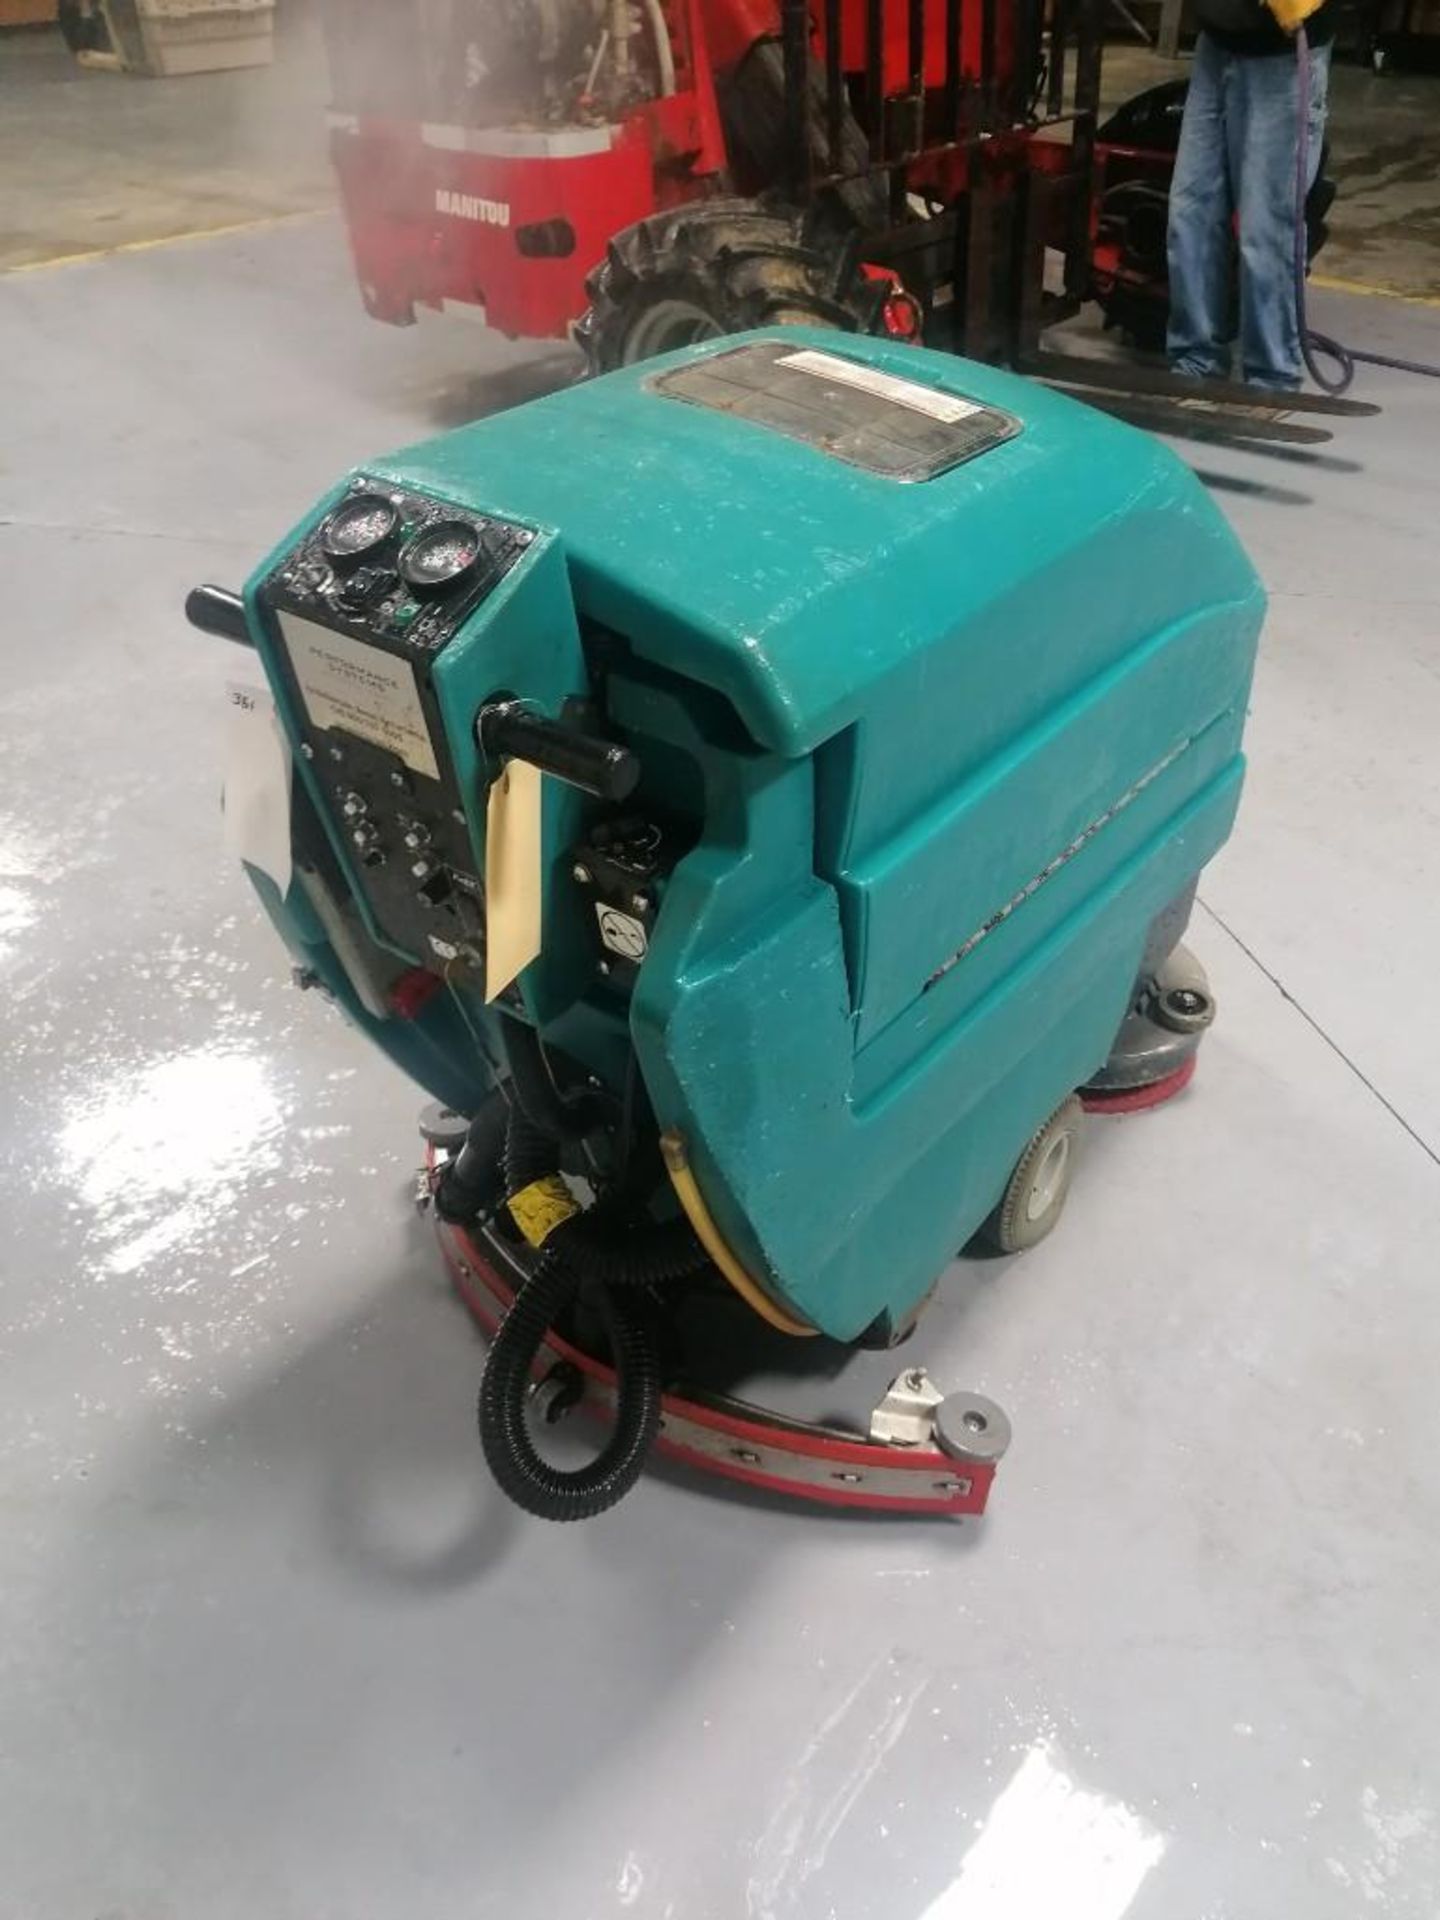 Tennant 5400 Floor Scrubber, Serial #540010229139 24 V, 21 Hours. Located in Mt. Pleasant, IA. - Image 19 of 19